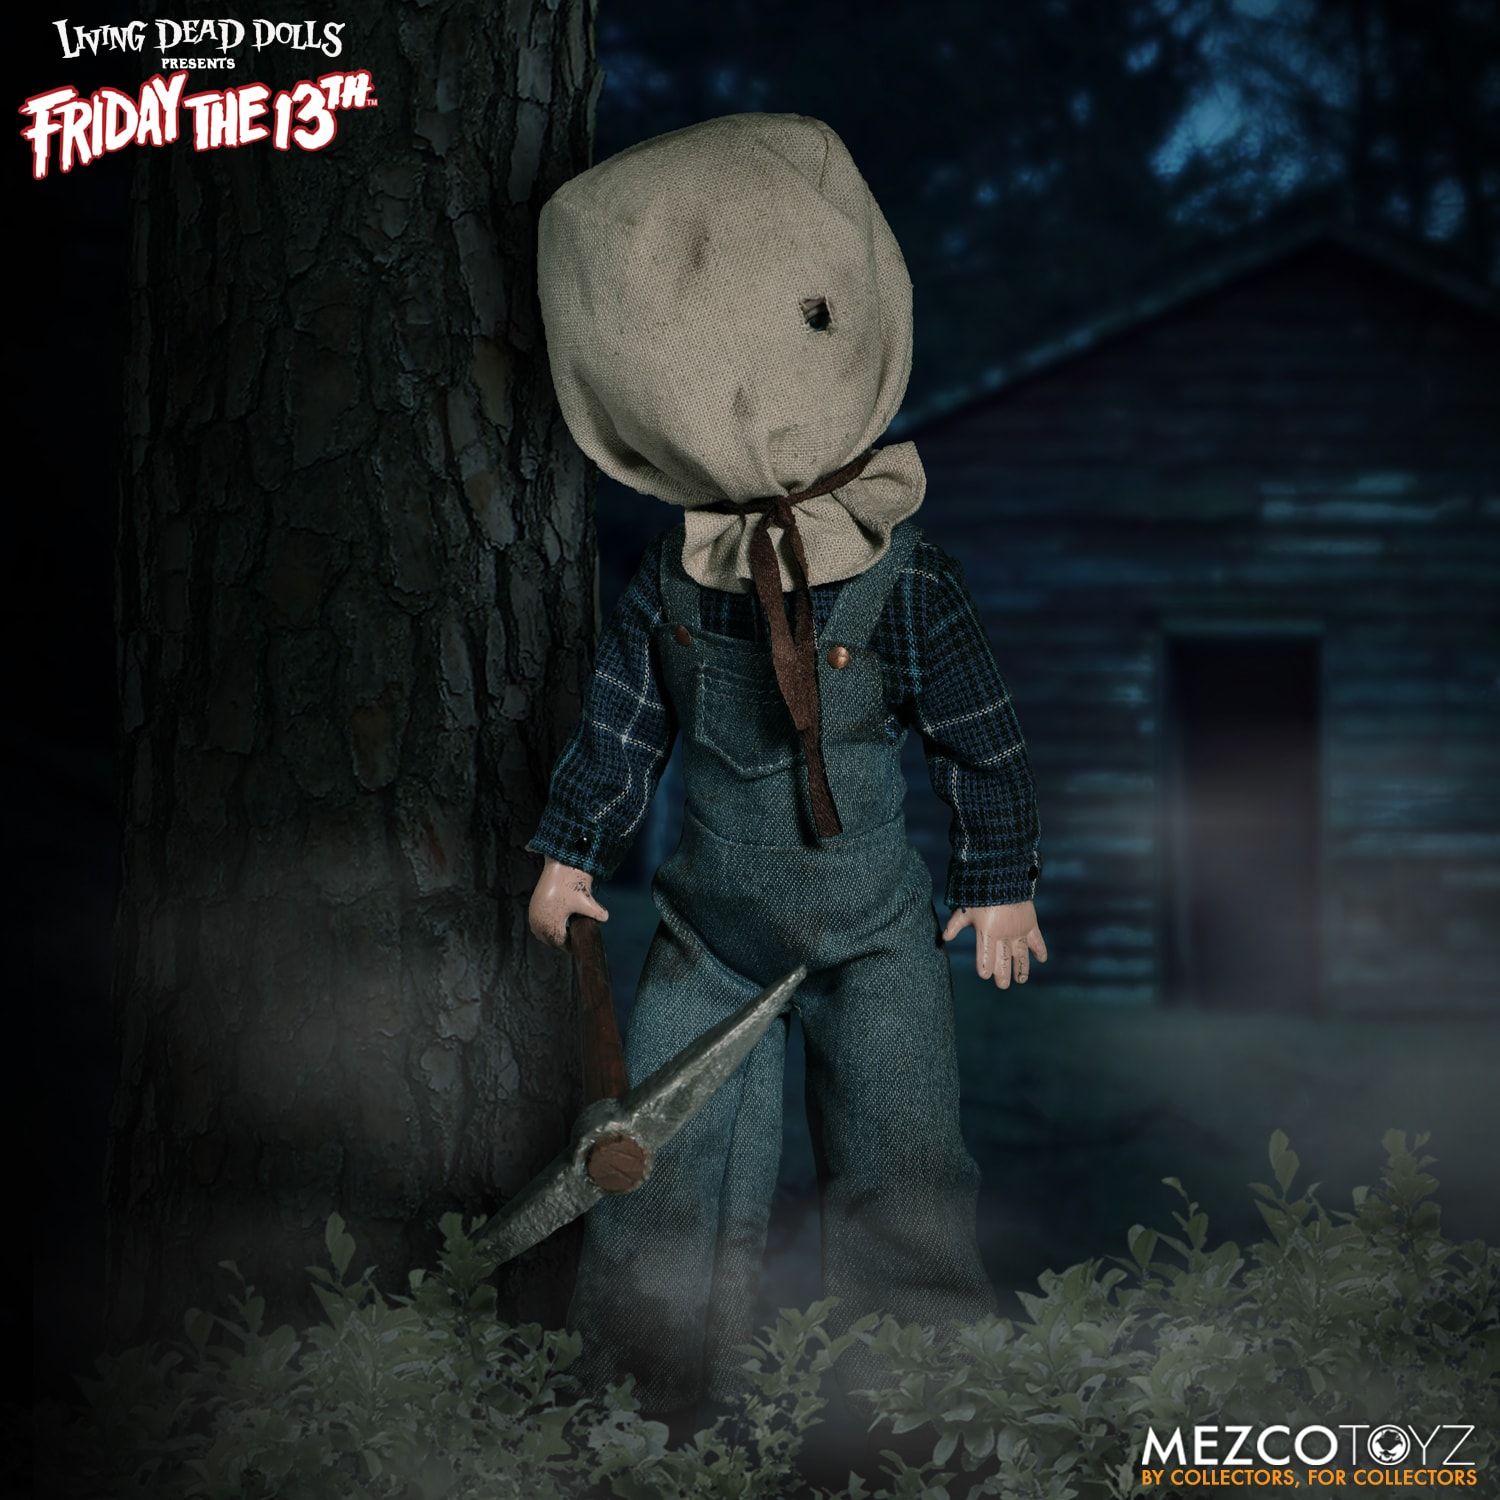 Mezco - Living Dead Dolls - Friday the 13th Part II - Jason Voorhees (Deluxe Edition) - Marvelous Toys